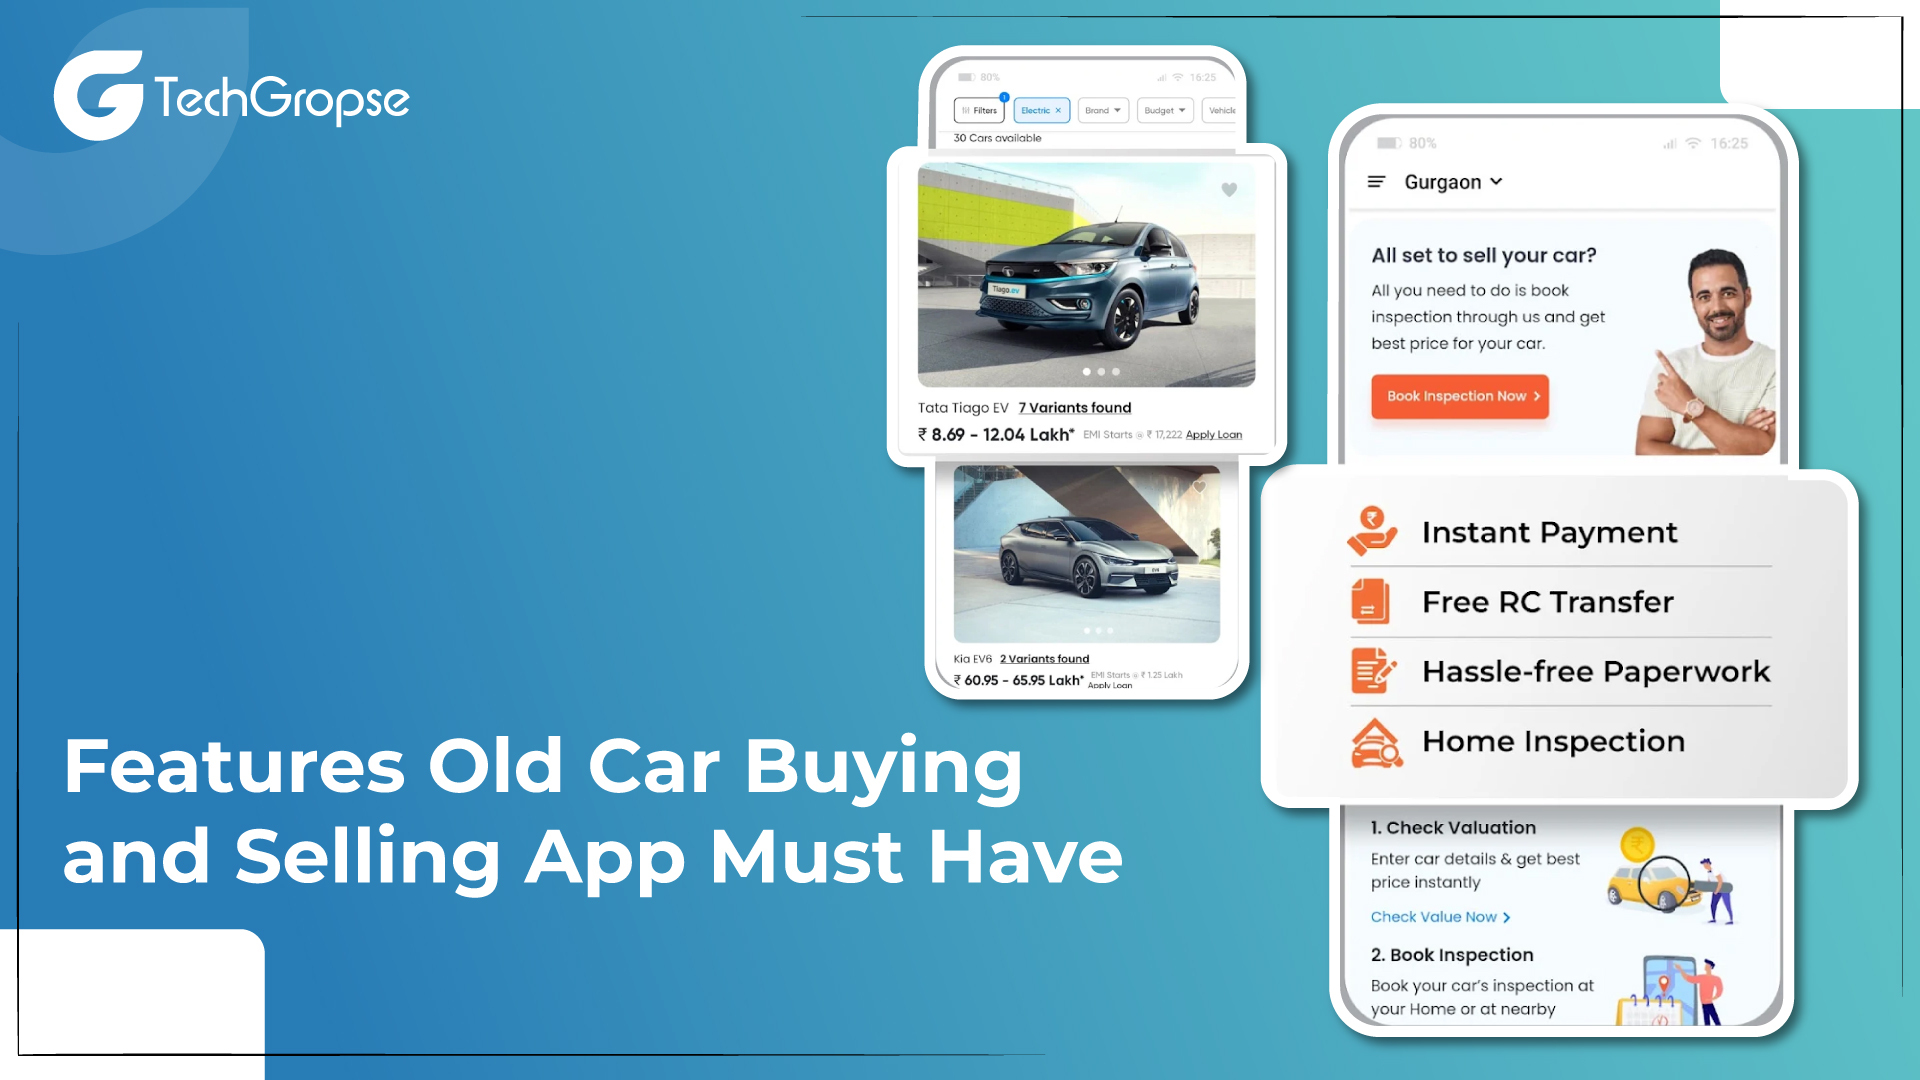 Features Old Car Buying and Selling App Must Have